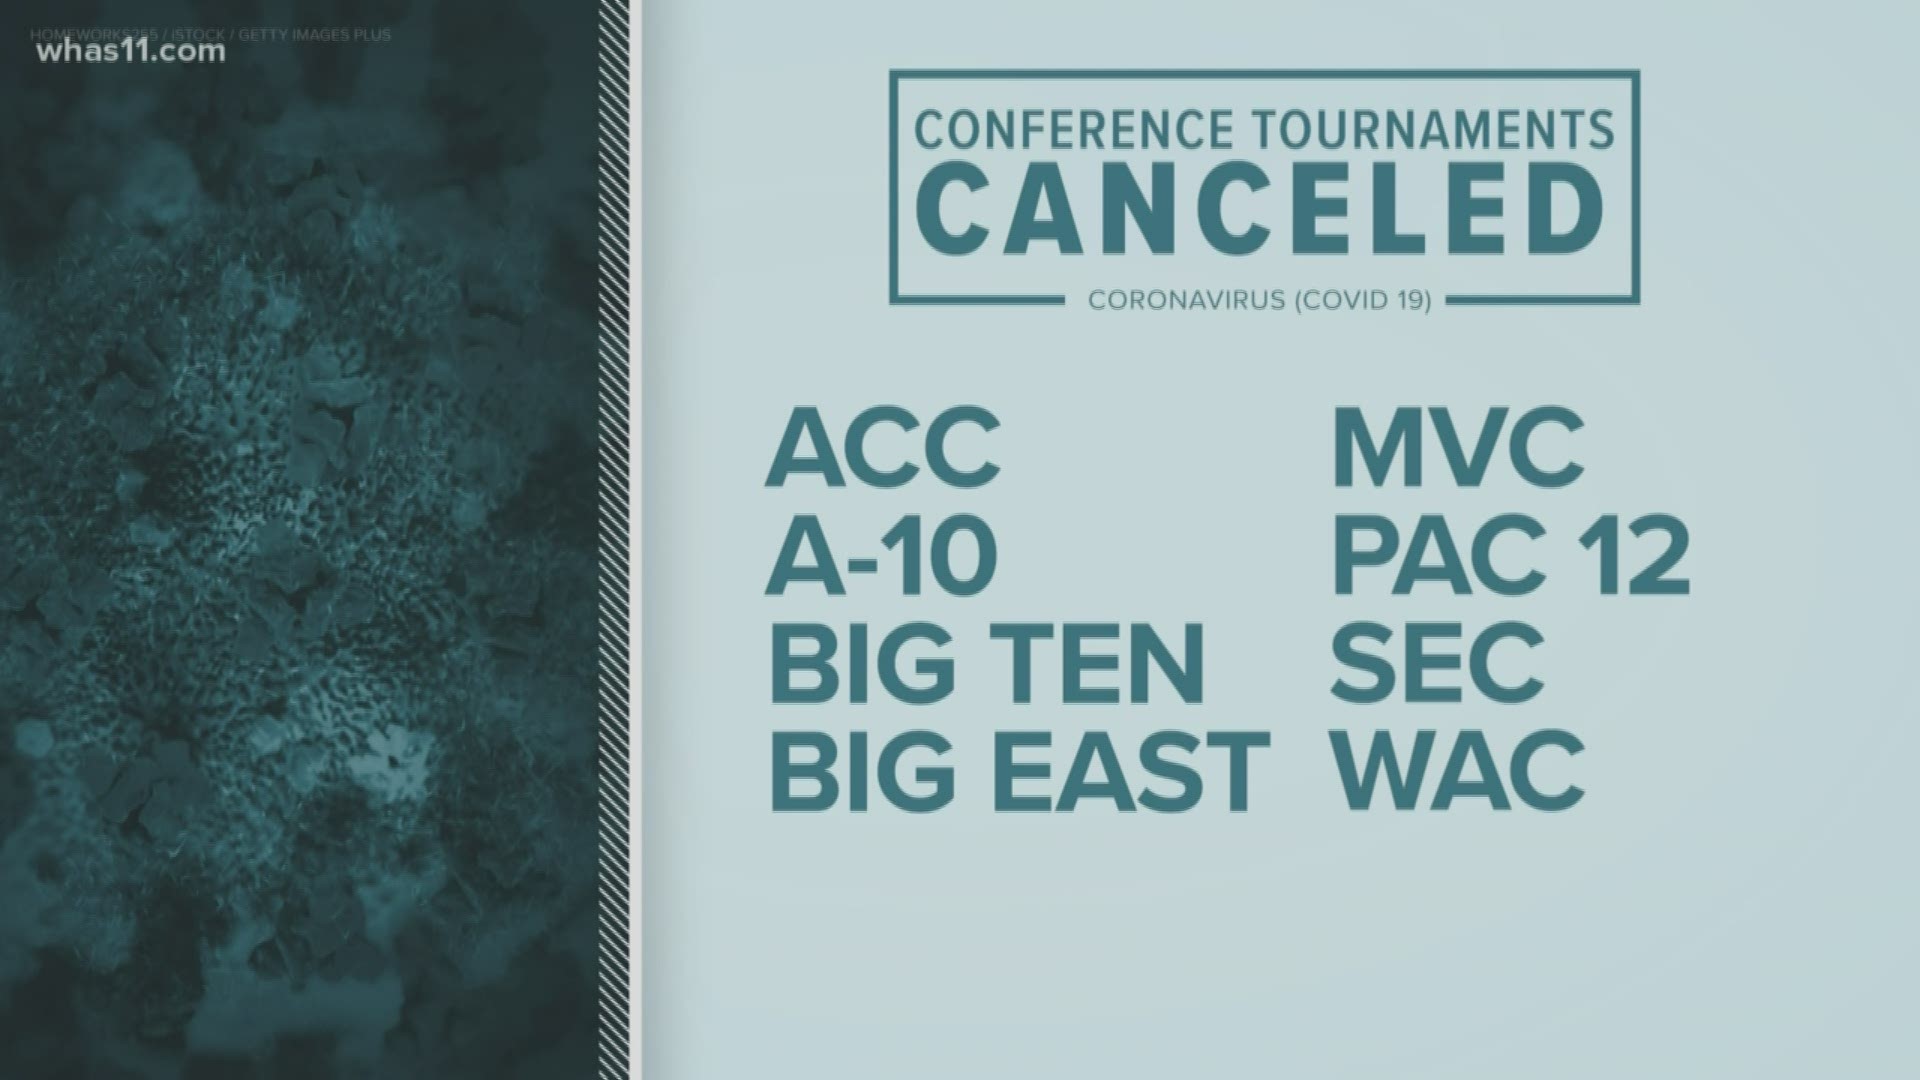 The SEC, the ACC and the Big Ten are all cancelled.